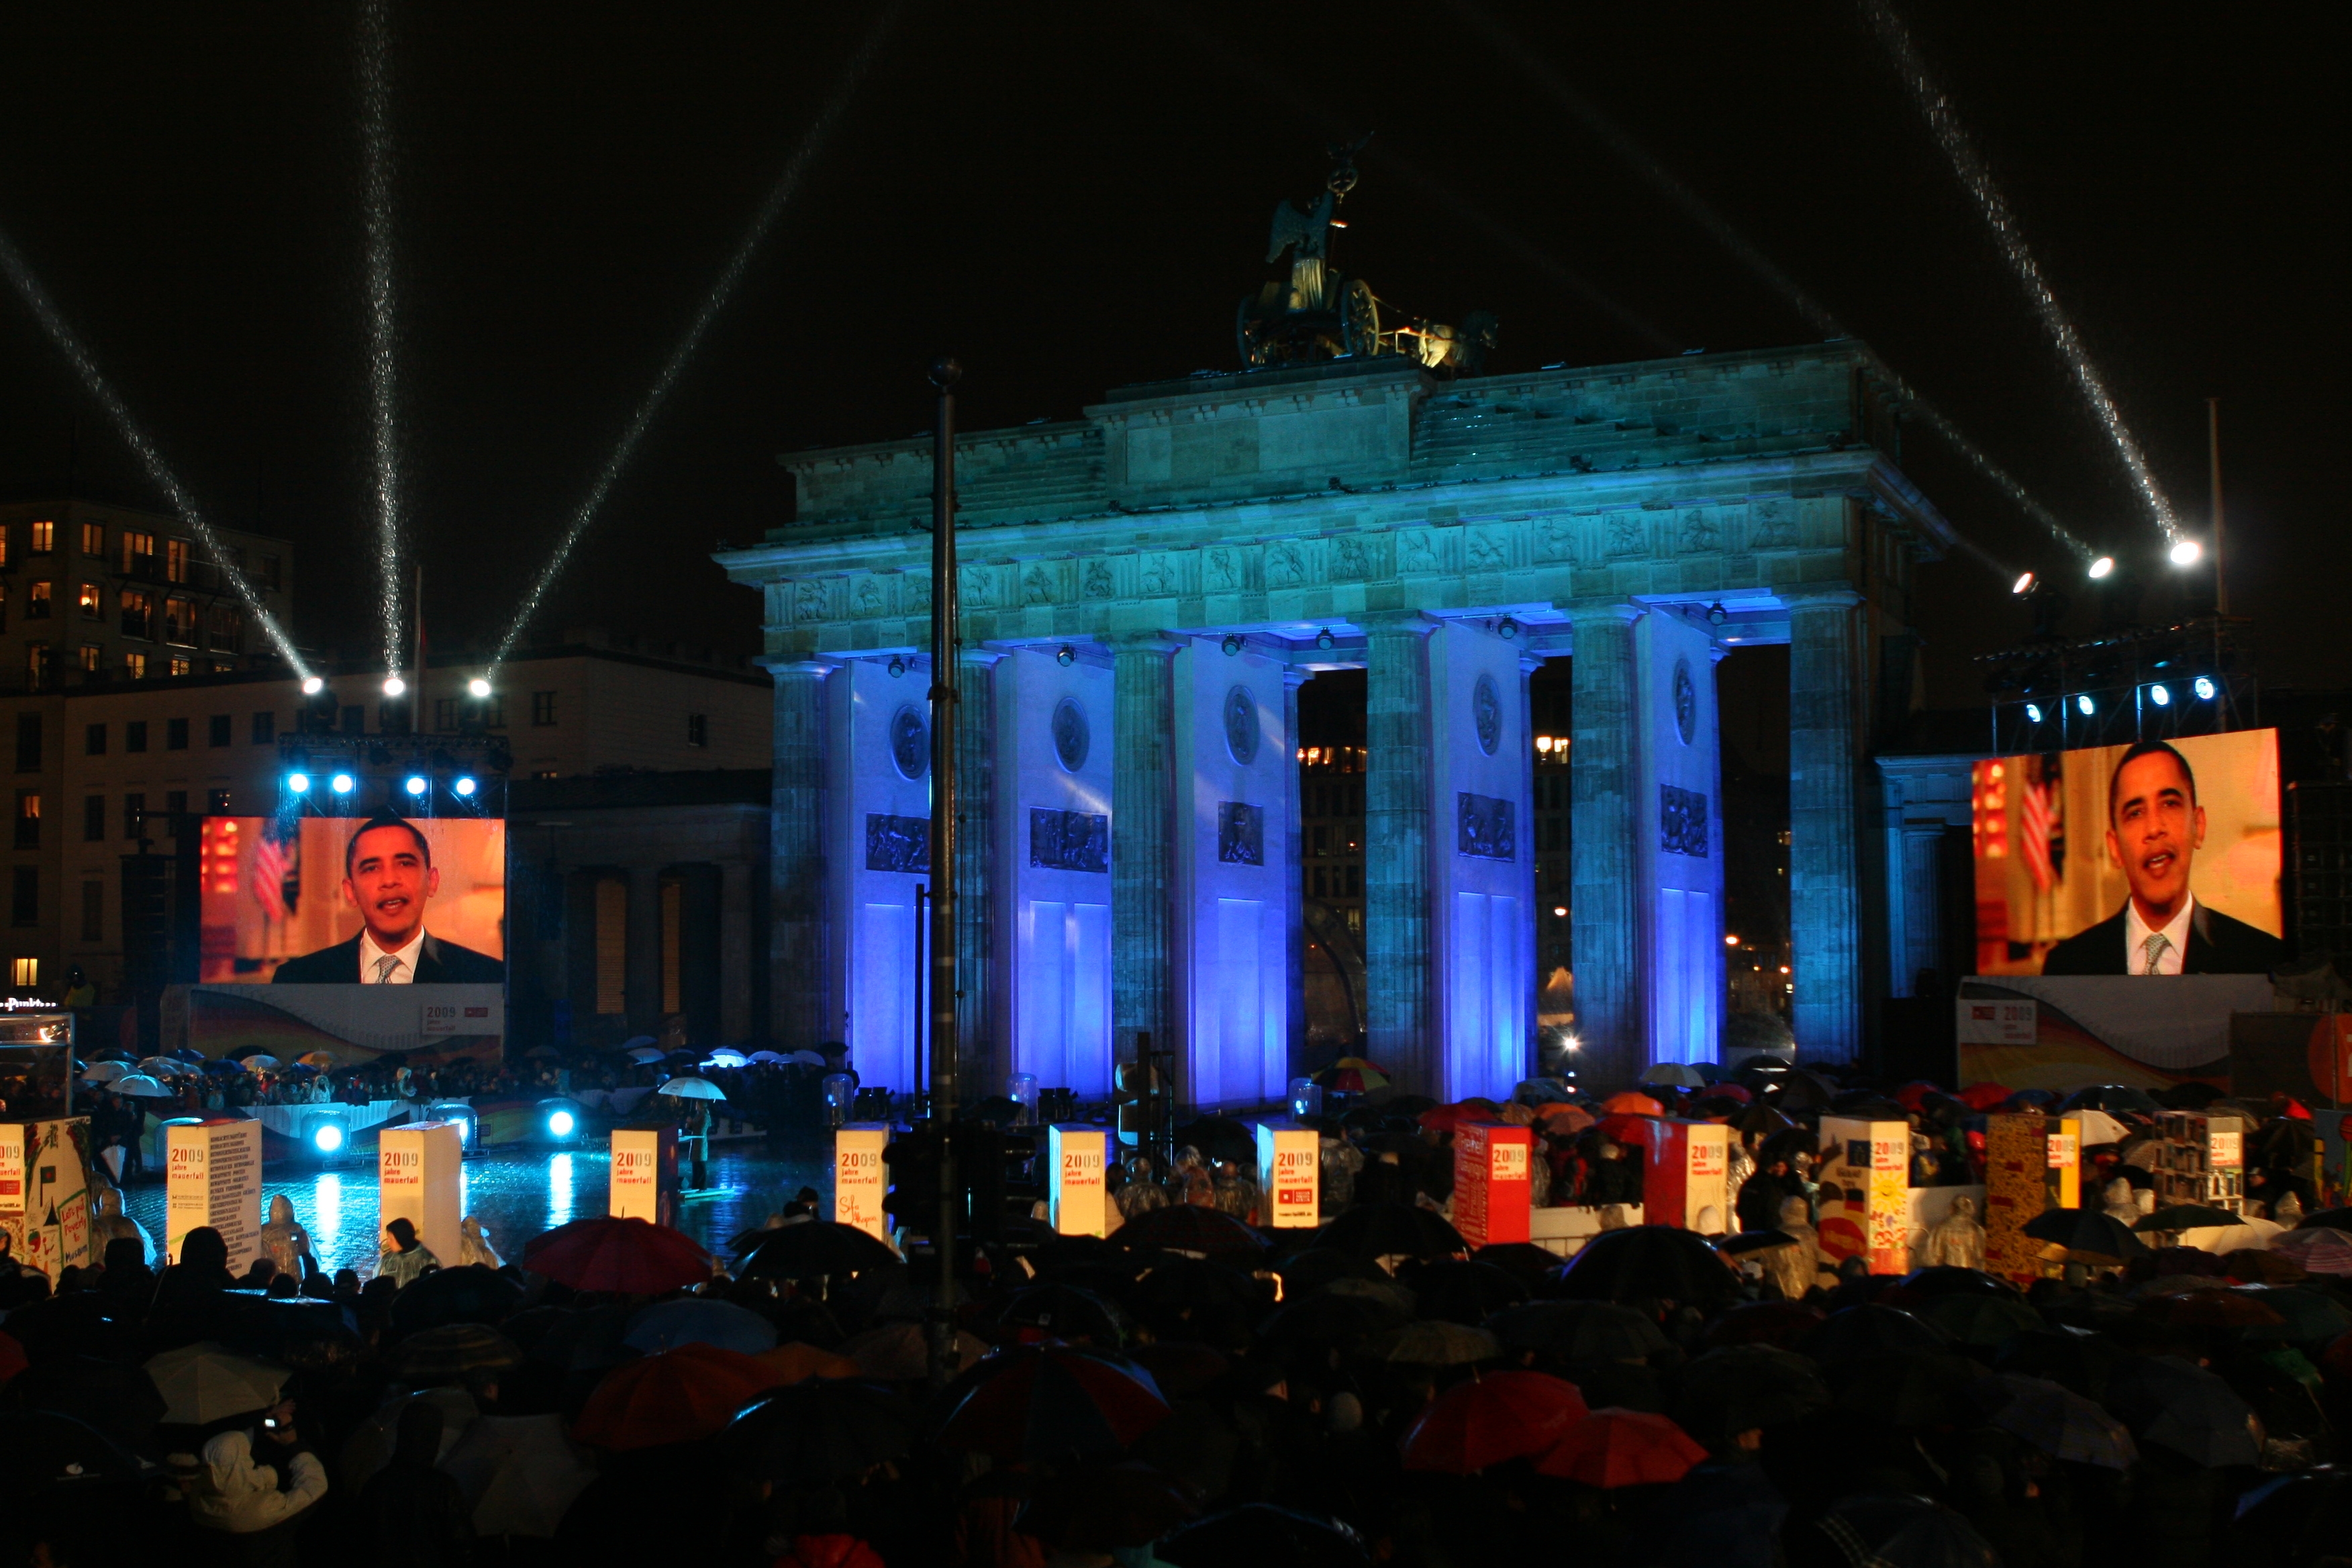 Barack Obama's video message during the Freedom Festival in Berlin 2009